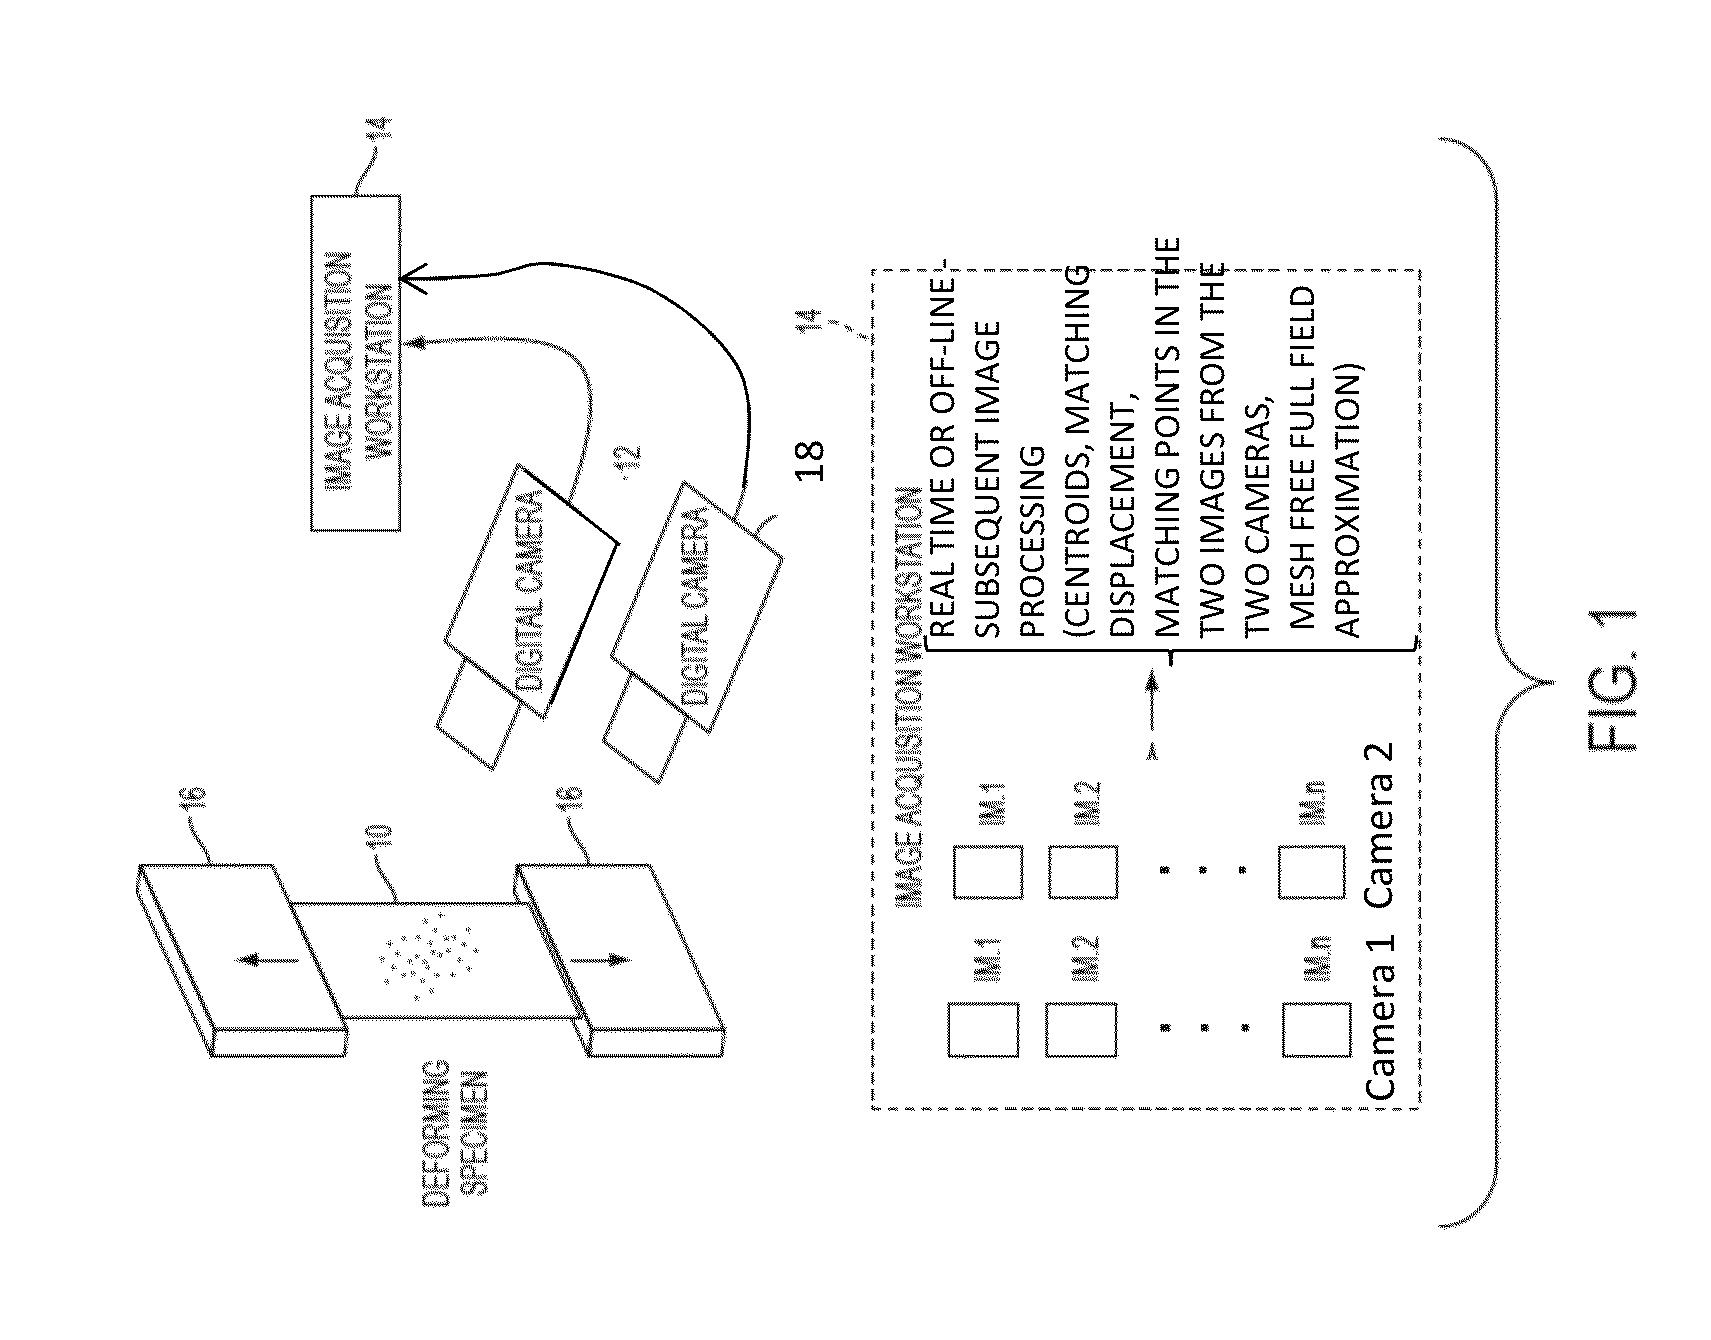 System and Method for Remote Full Field Three-Dimensional Displacement and Strain Measurements